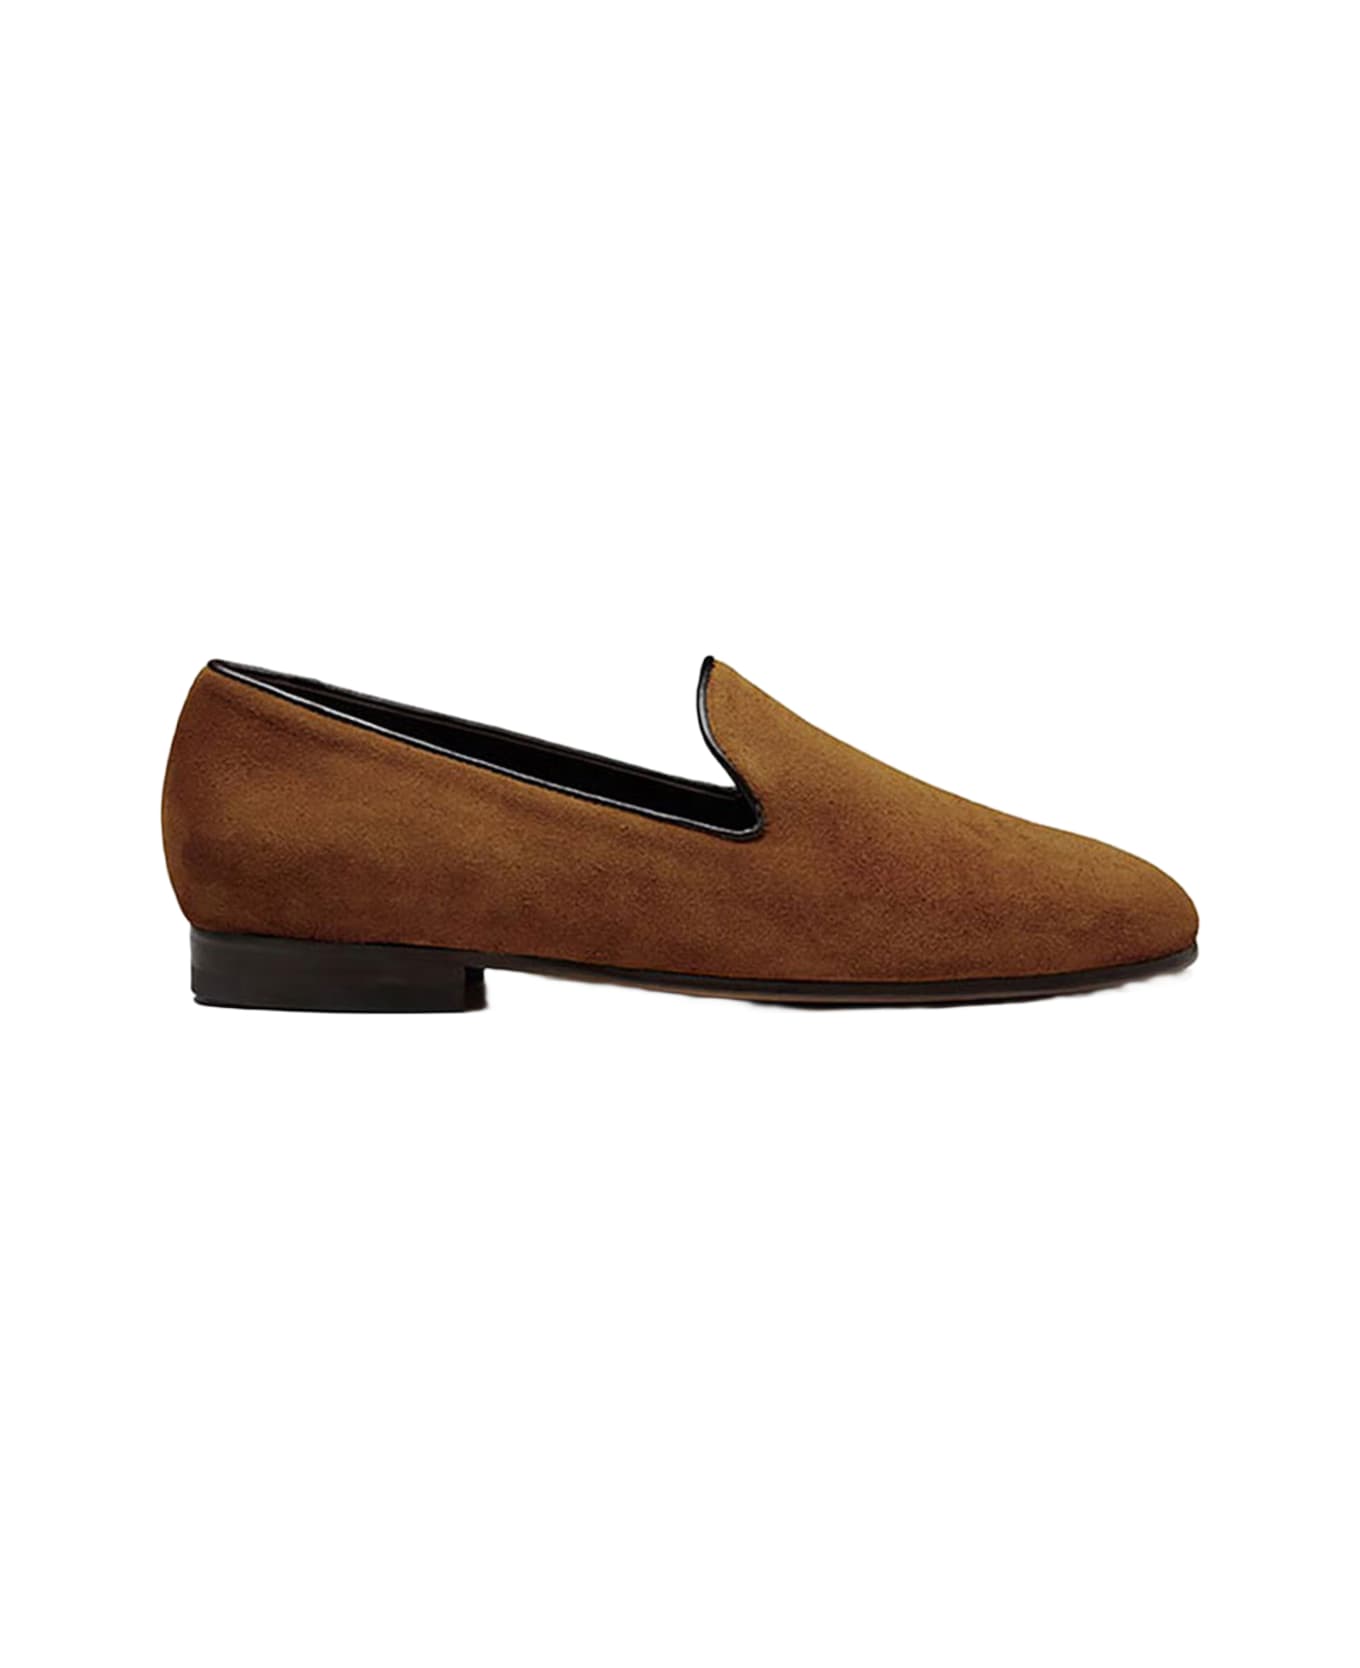 CB Made in Italy Suede Slip-on Positano - Tobacco